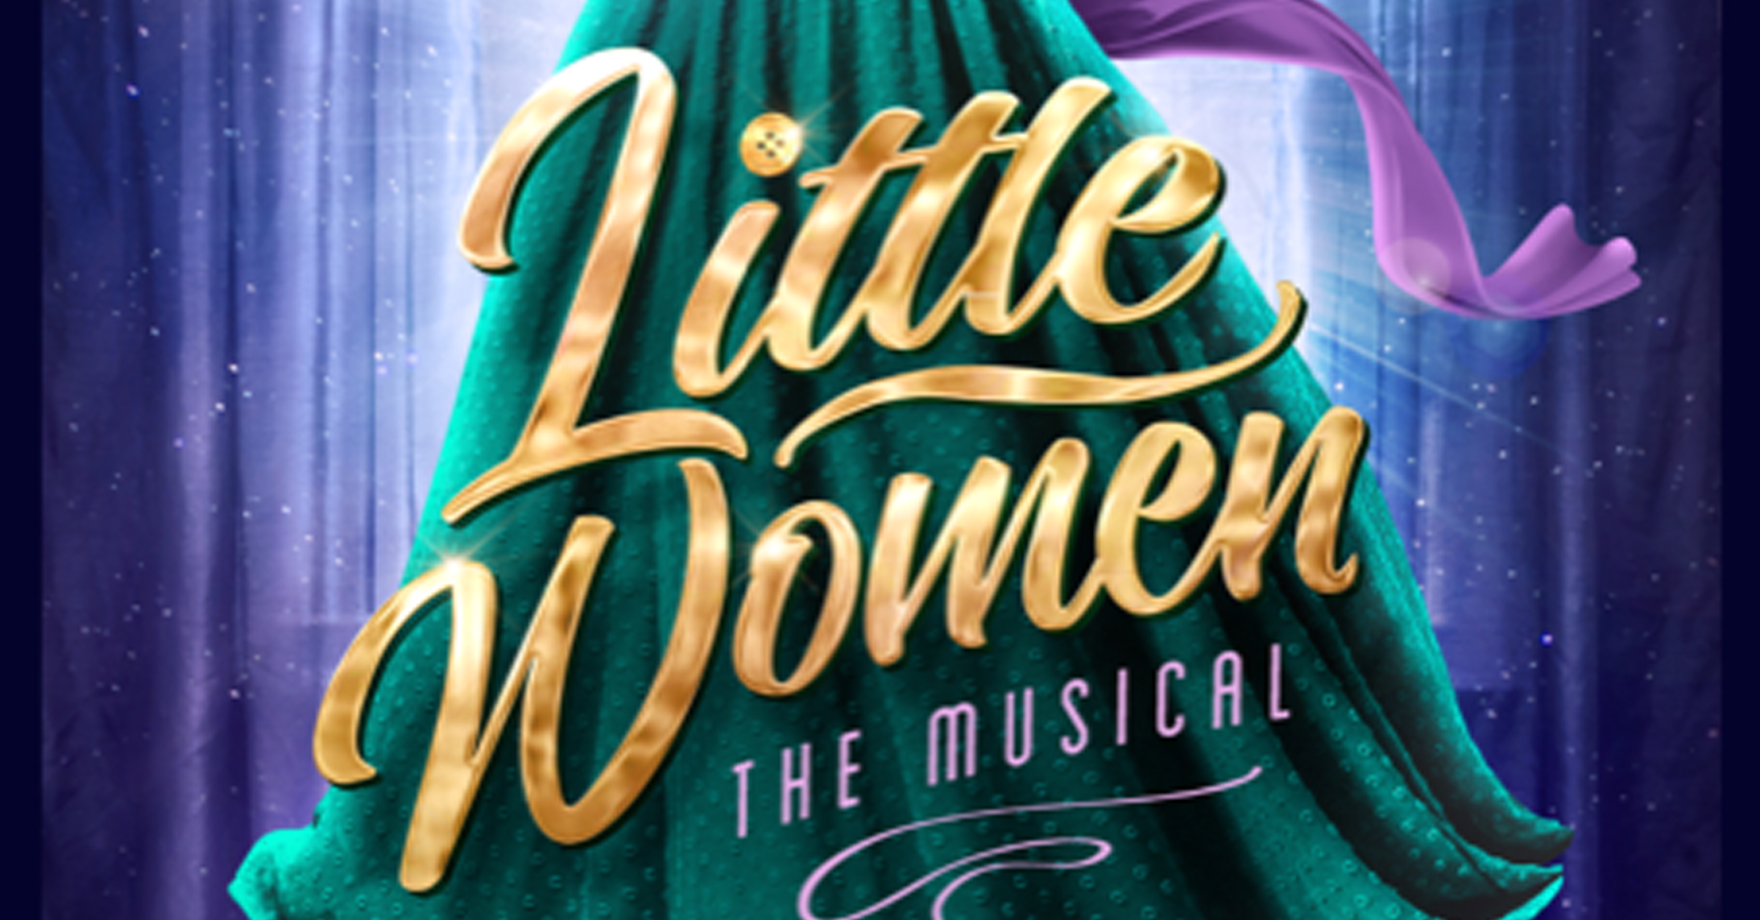 Little Women at The Minack Theatre